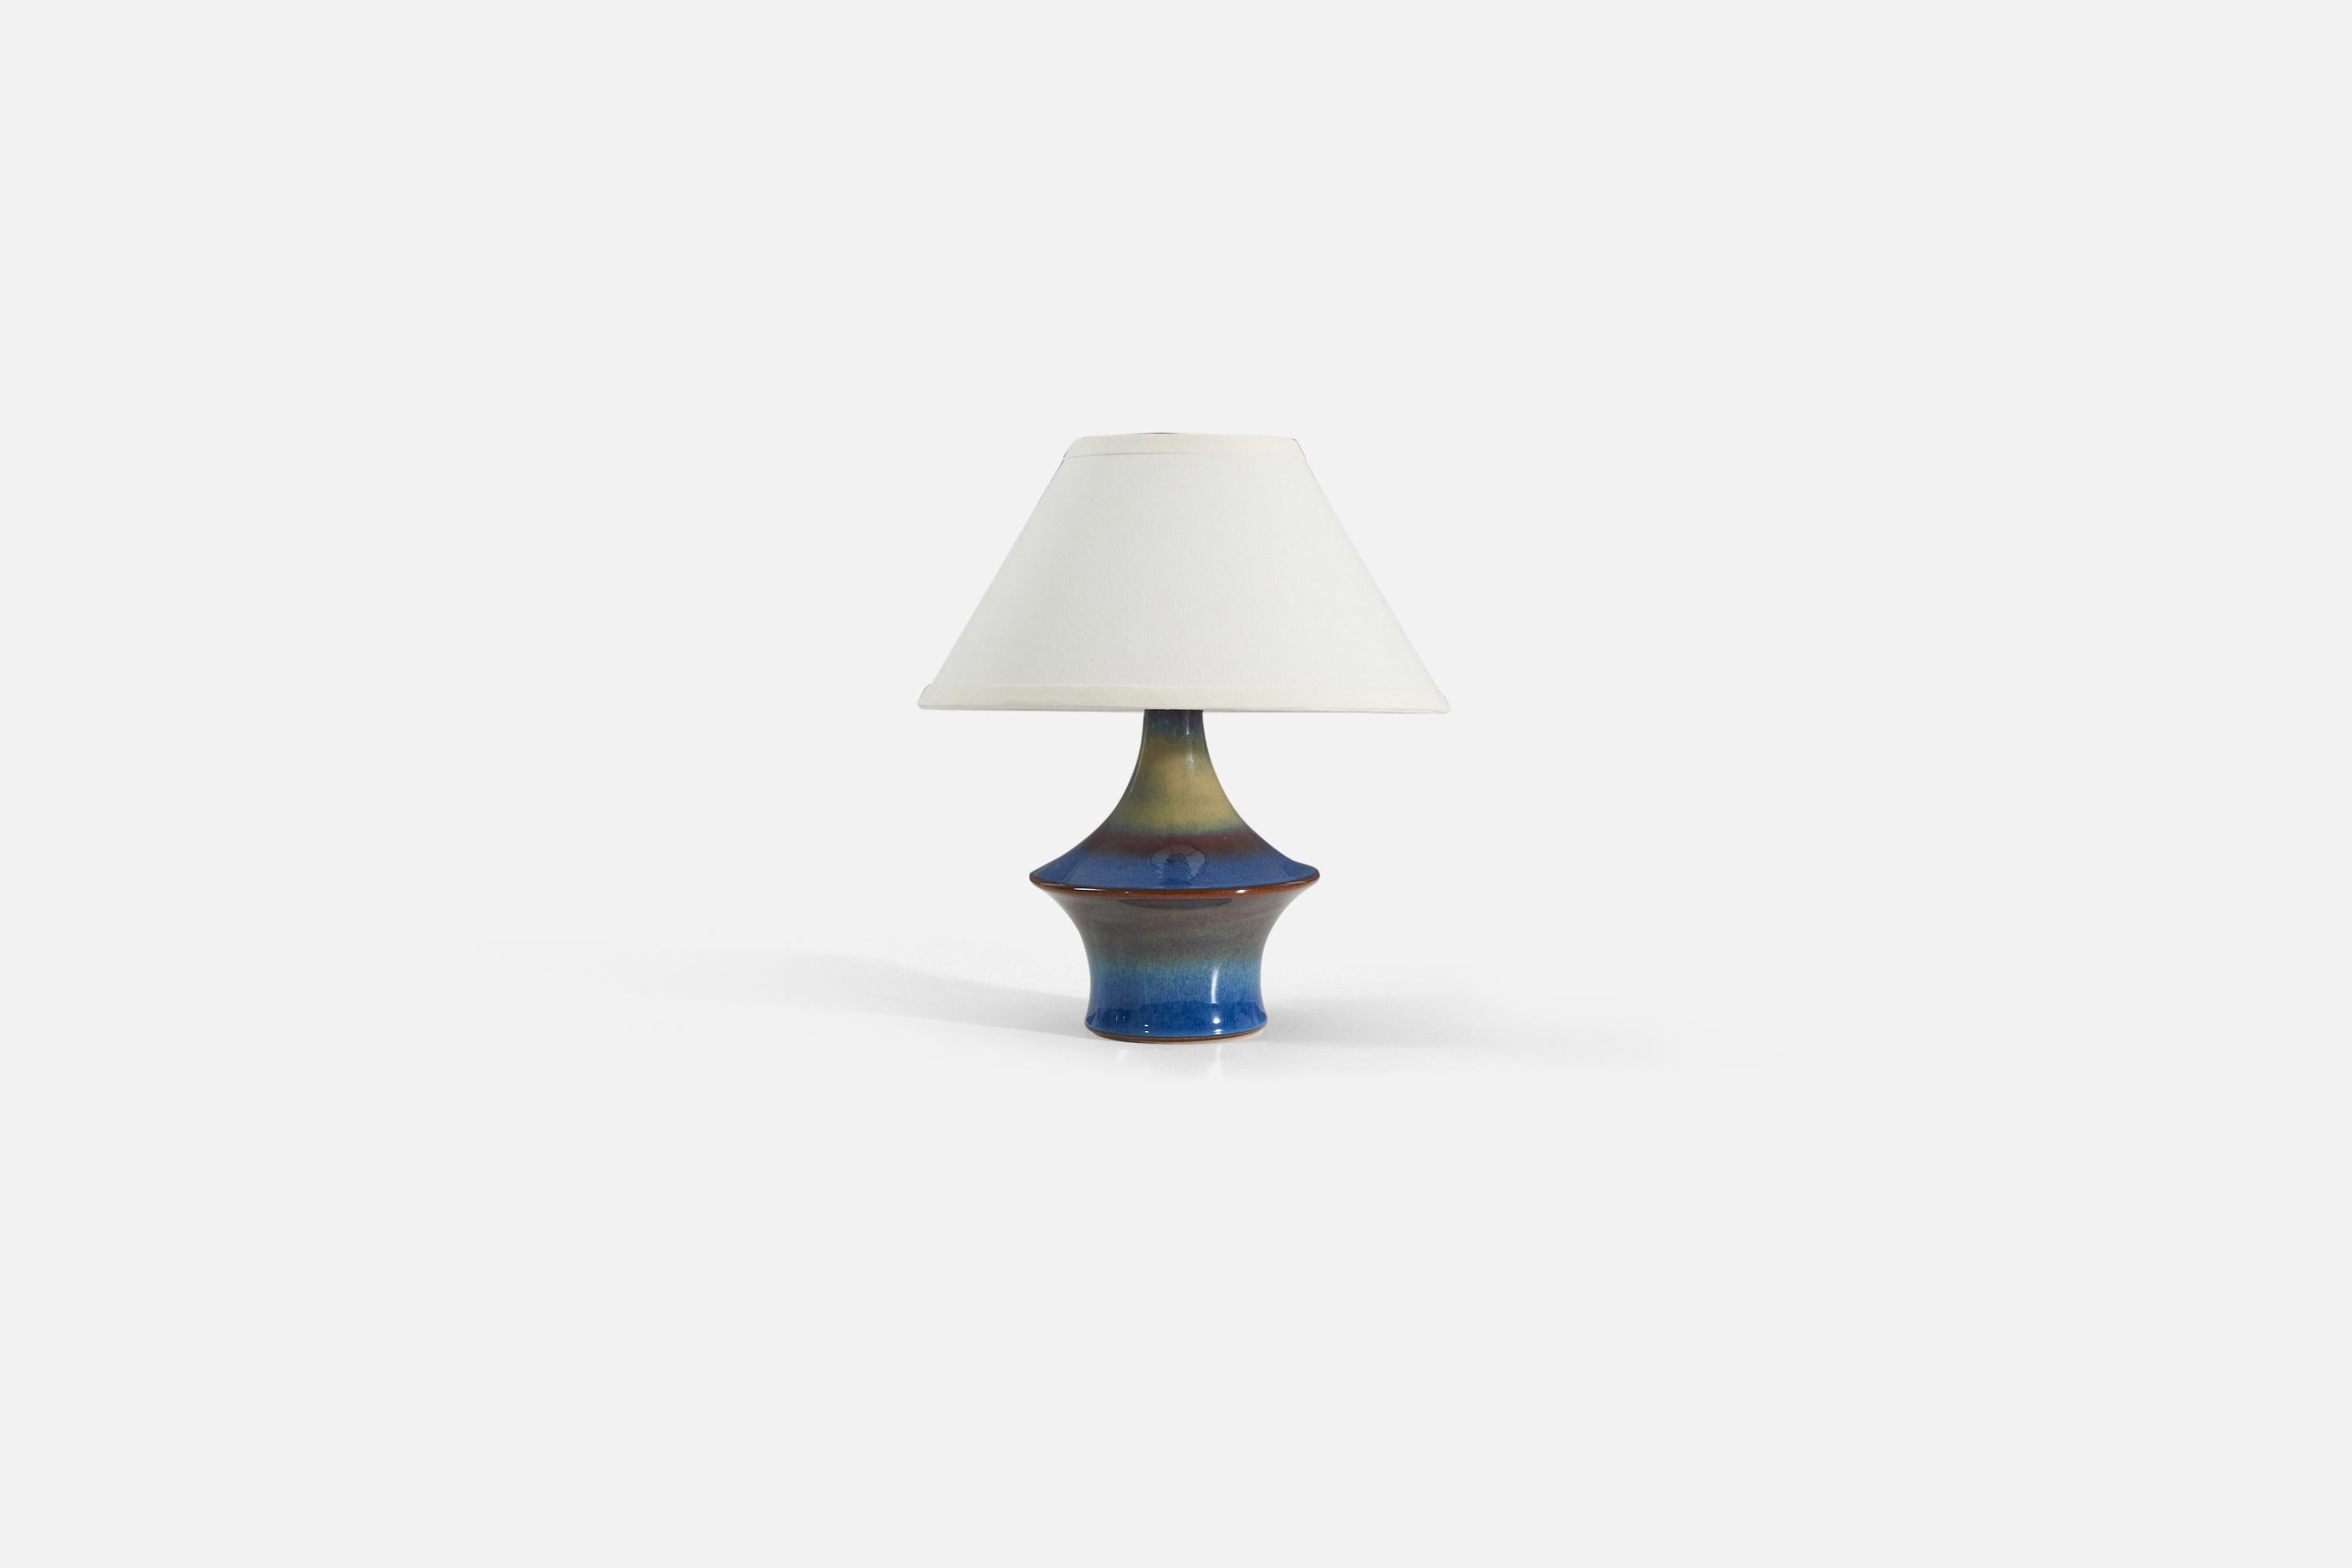 A table lamp in green, red, and blue-glazed stoneware designed and produced by Søholm Stentøj, Bornholm, Denmark, c. 1960s. The lamp has maker's stamp to base.

Lamp sold without shade. 

Measurements listed are of lamp.
Shade : 5.25 x 12.25 x